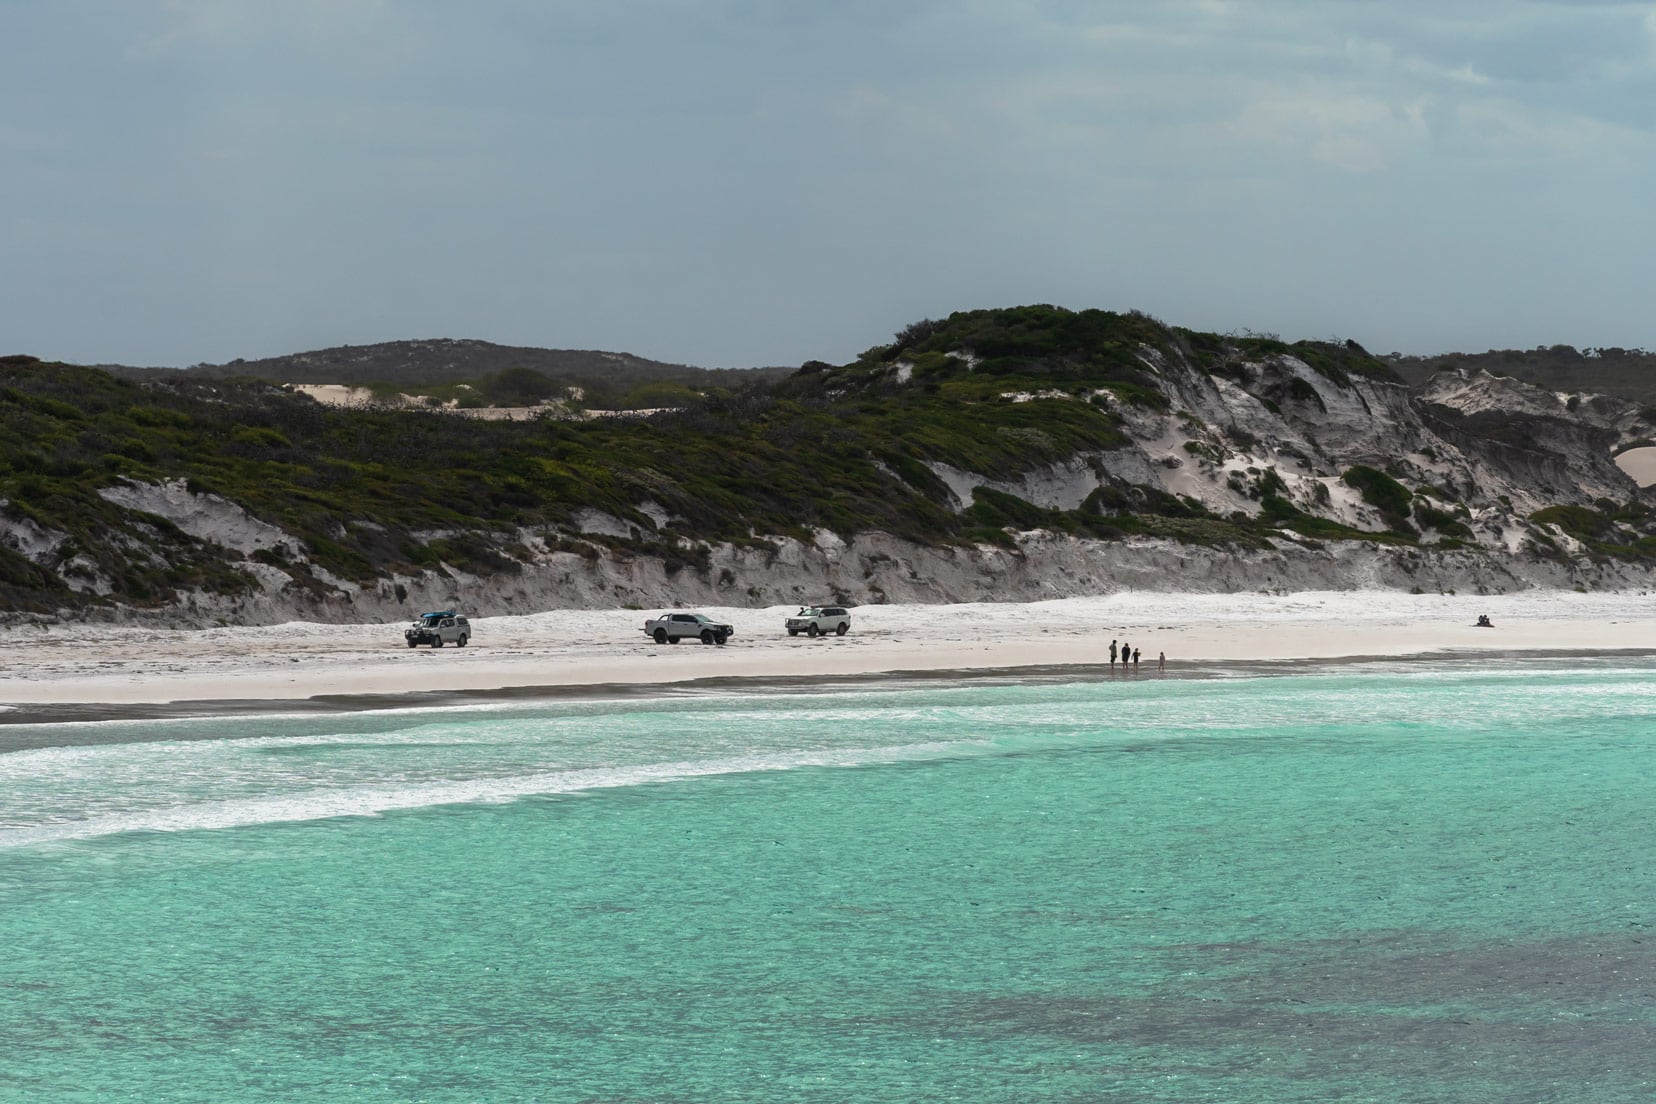 View of Lucky Bay Beach with four wheel drives on the beach